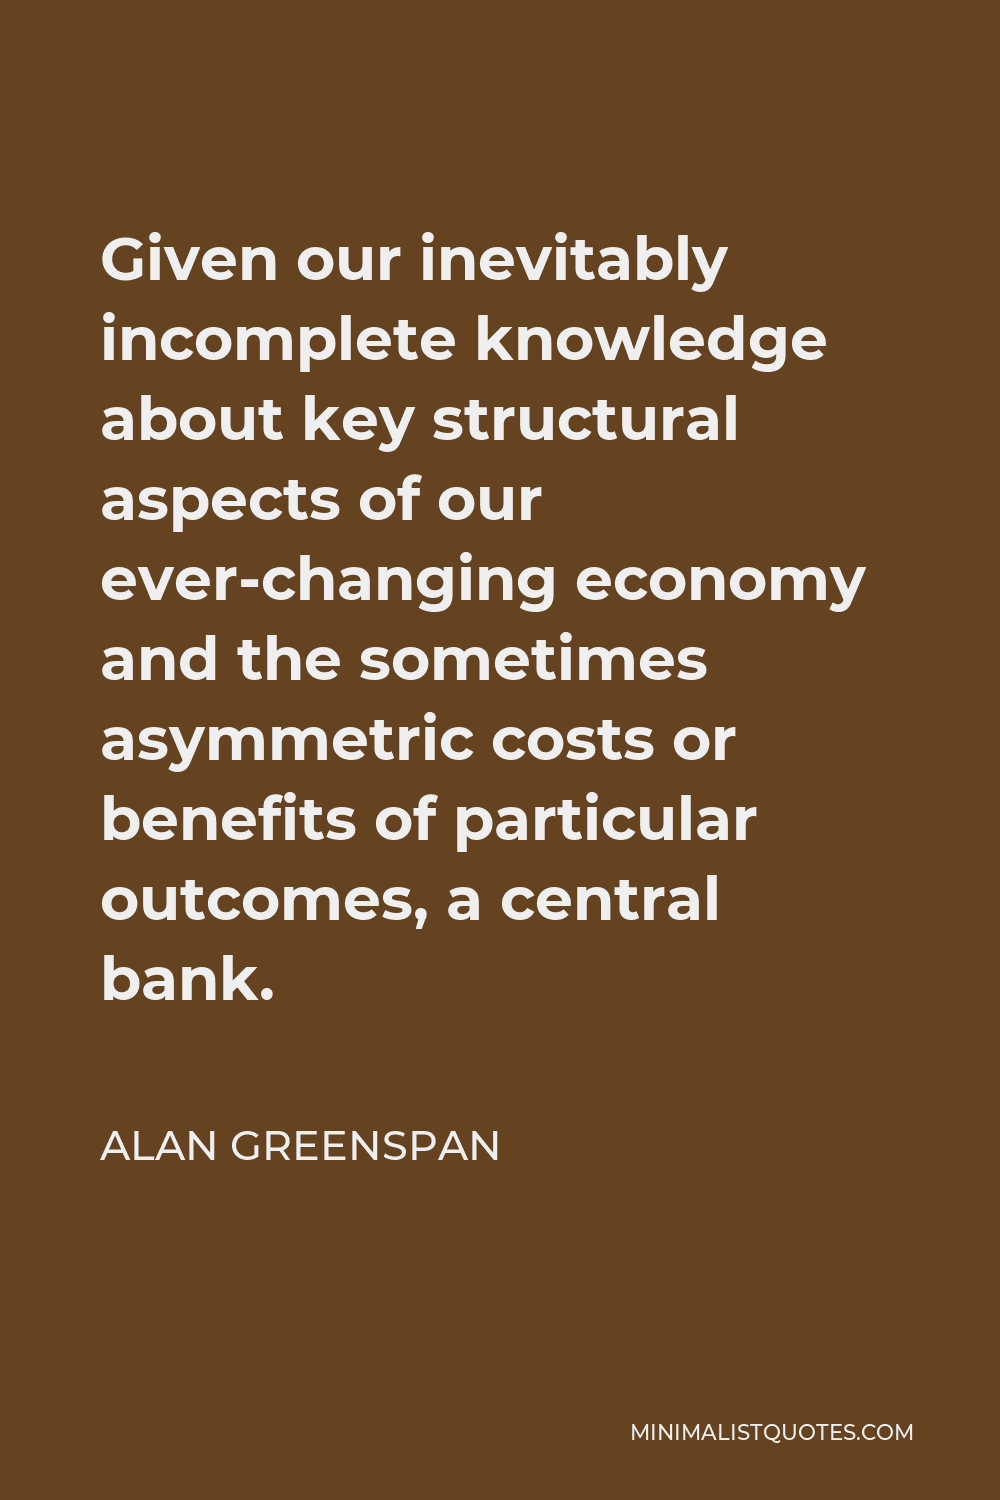 Alan Greenspan Quote - Given our inevitably incomplete knowledge about key structural aspects of our ever-changing economy and the sometimes asymmetric costs or benefits of particular outcomes, a central bank.